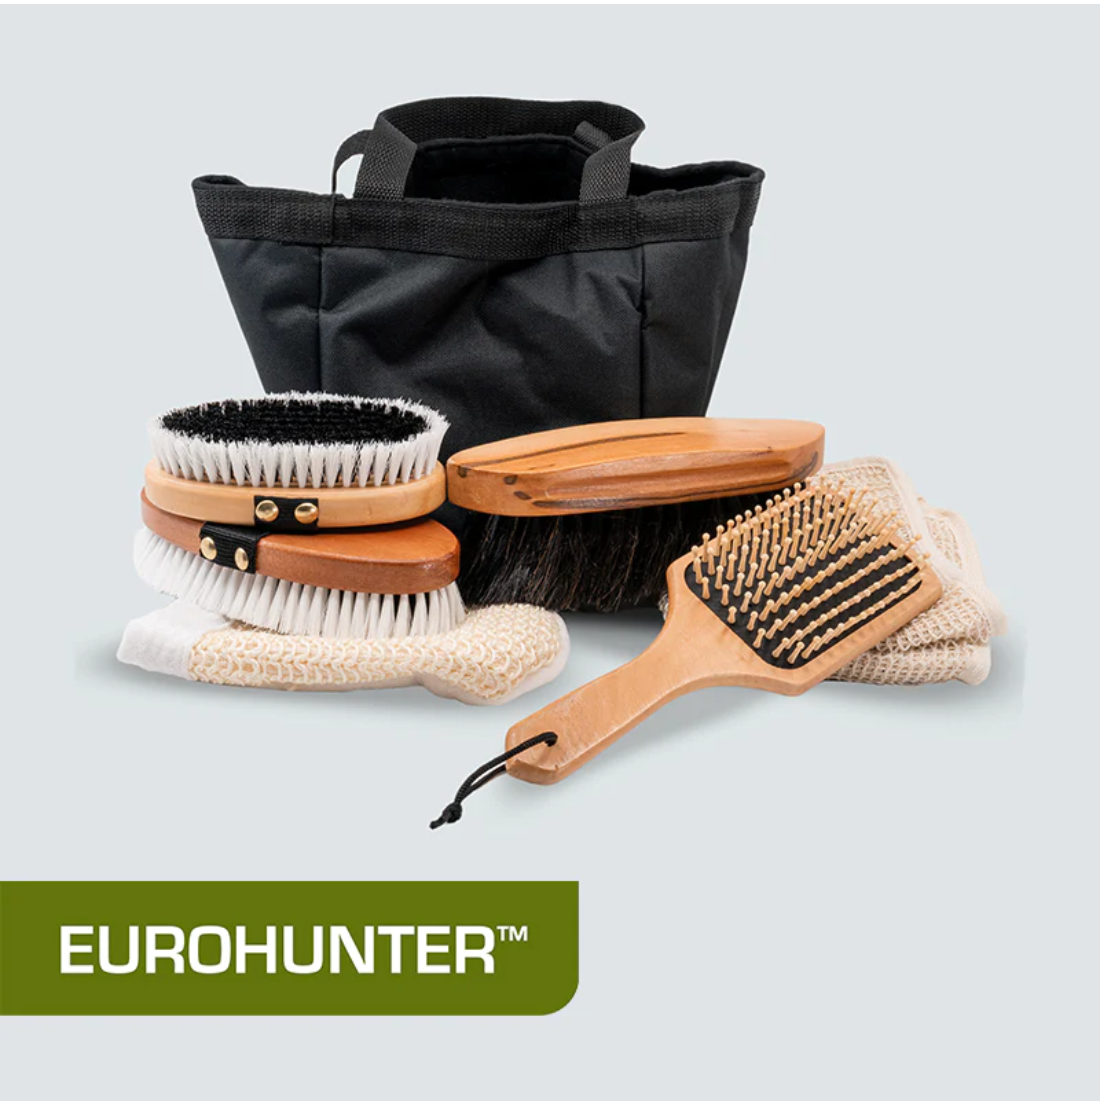 Eurohunter Wooden Grooming Kit & Tote